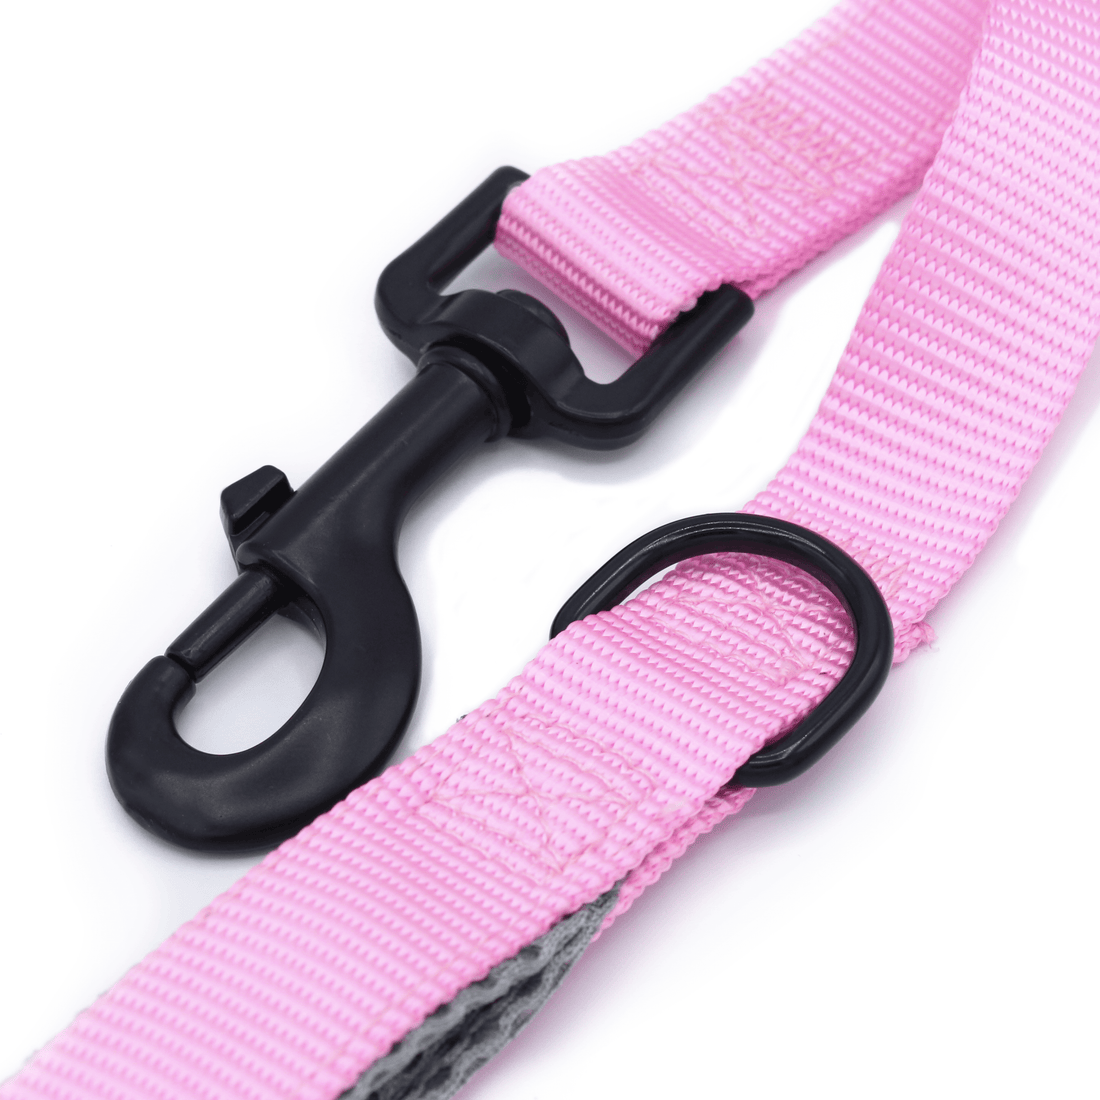 a bright pink leash with black clasp and d-ring